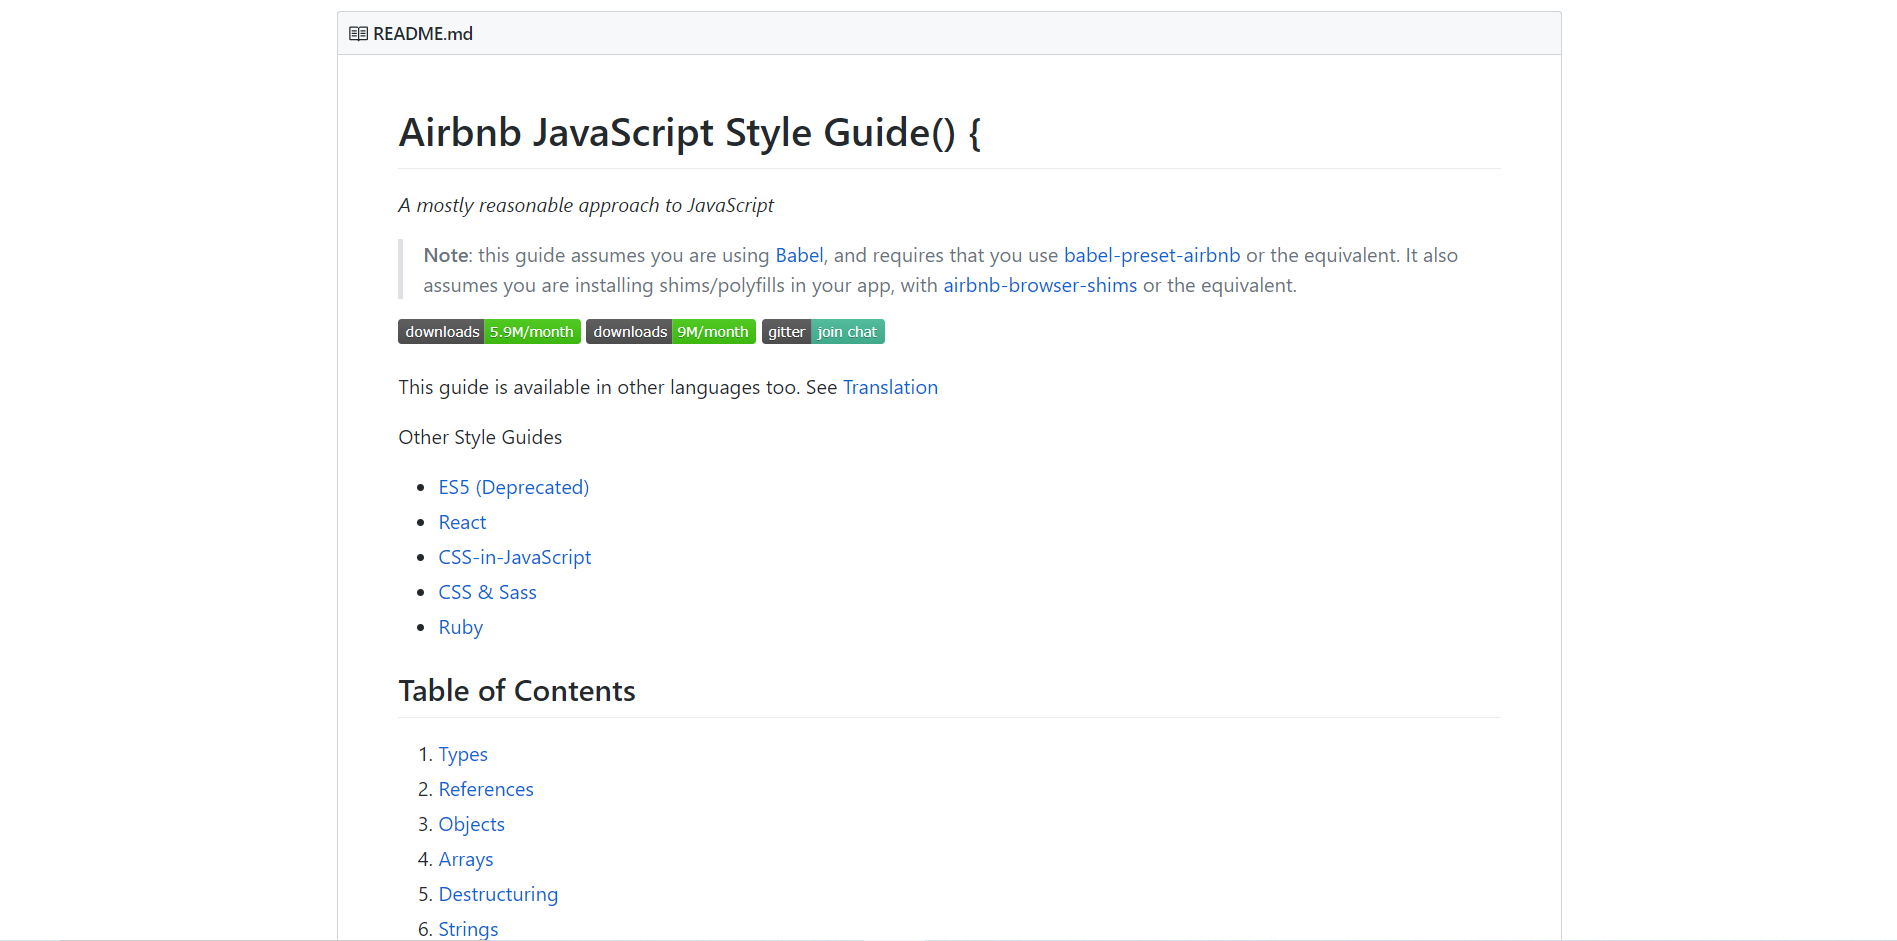 Airbnb JS style guide README